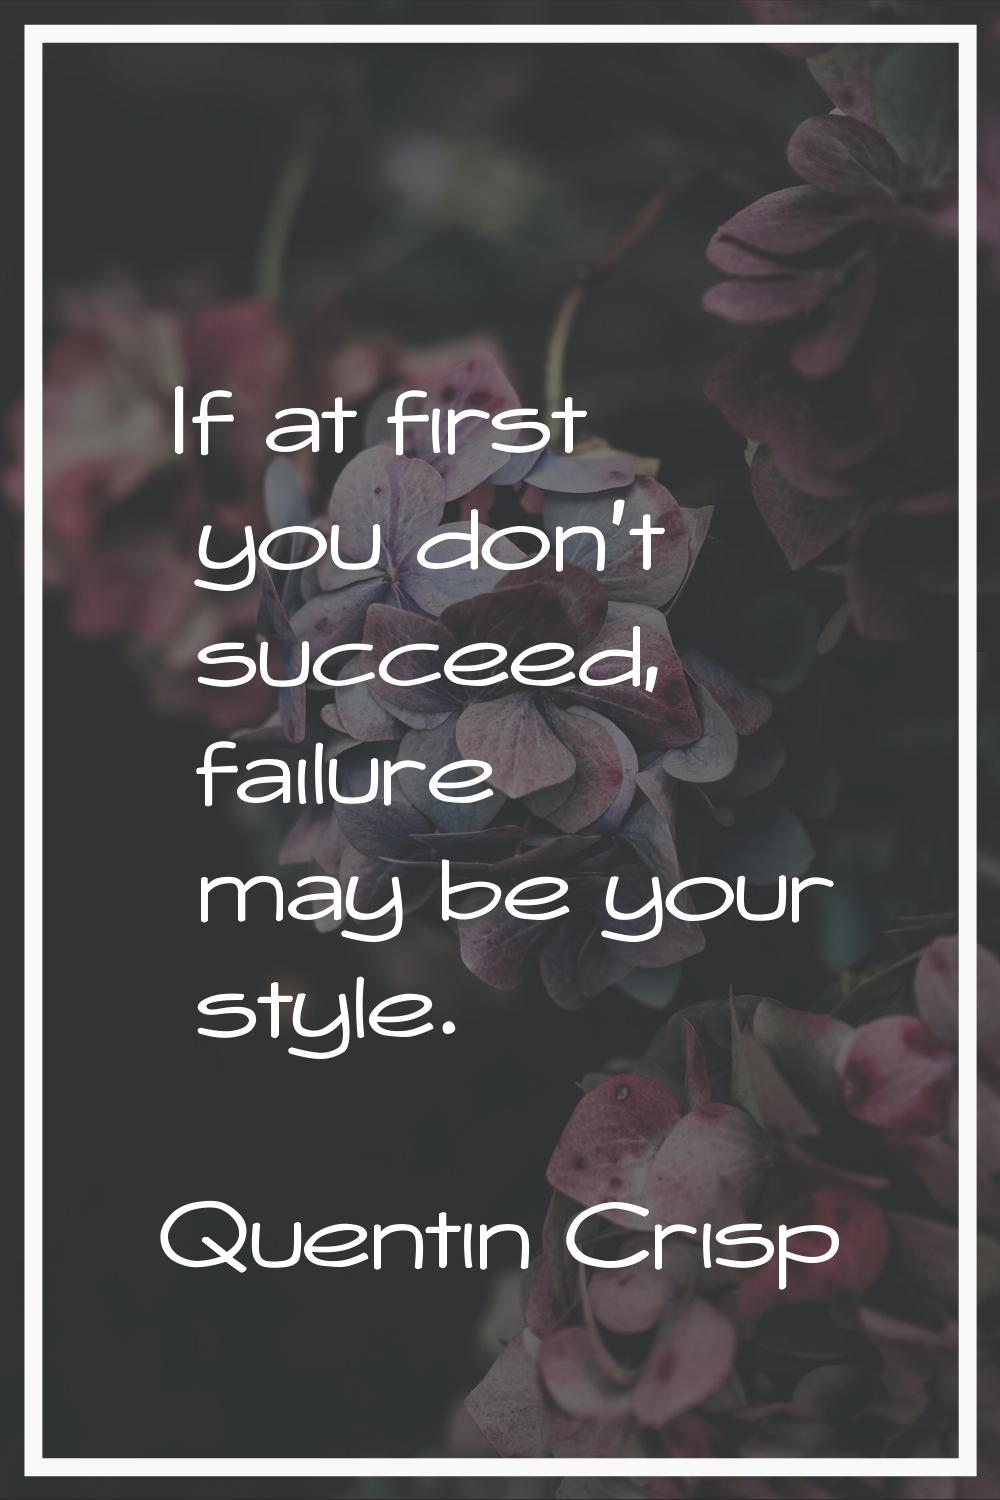 If at first you don't succeed, failure may be your style.